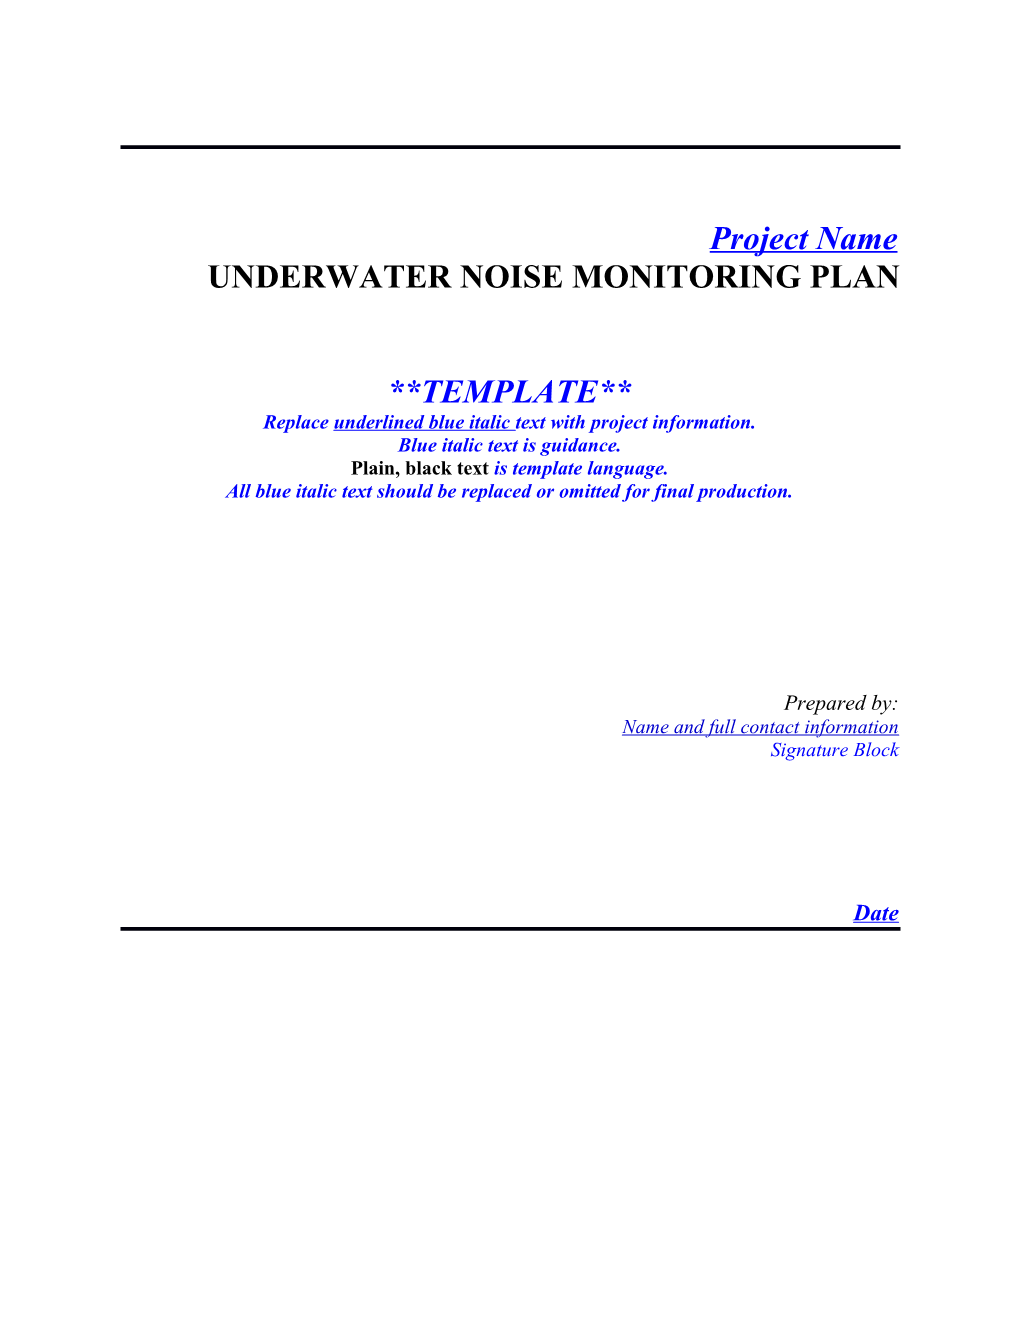 Underwater Noise Monitoring Plan Template